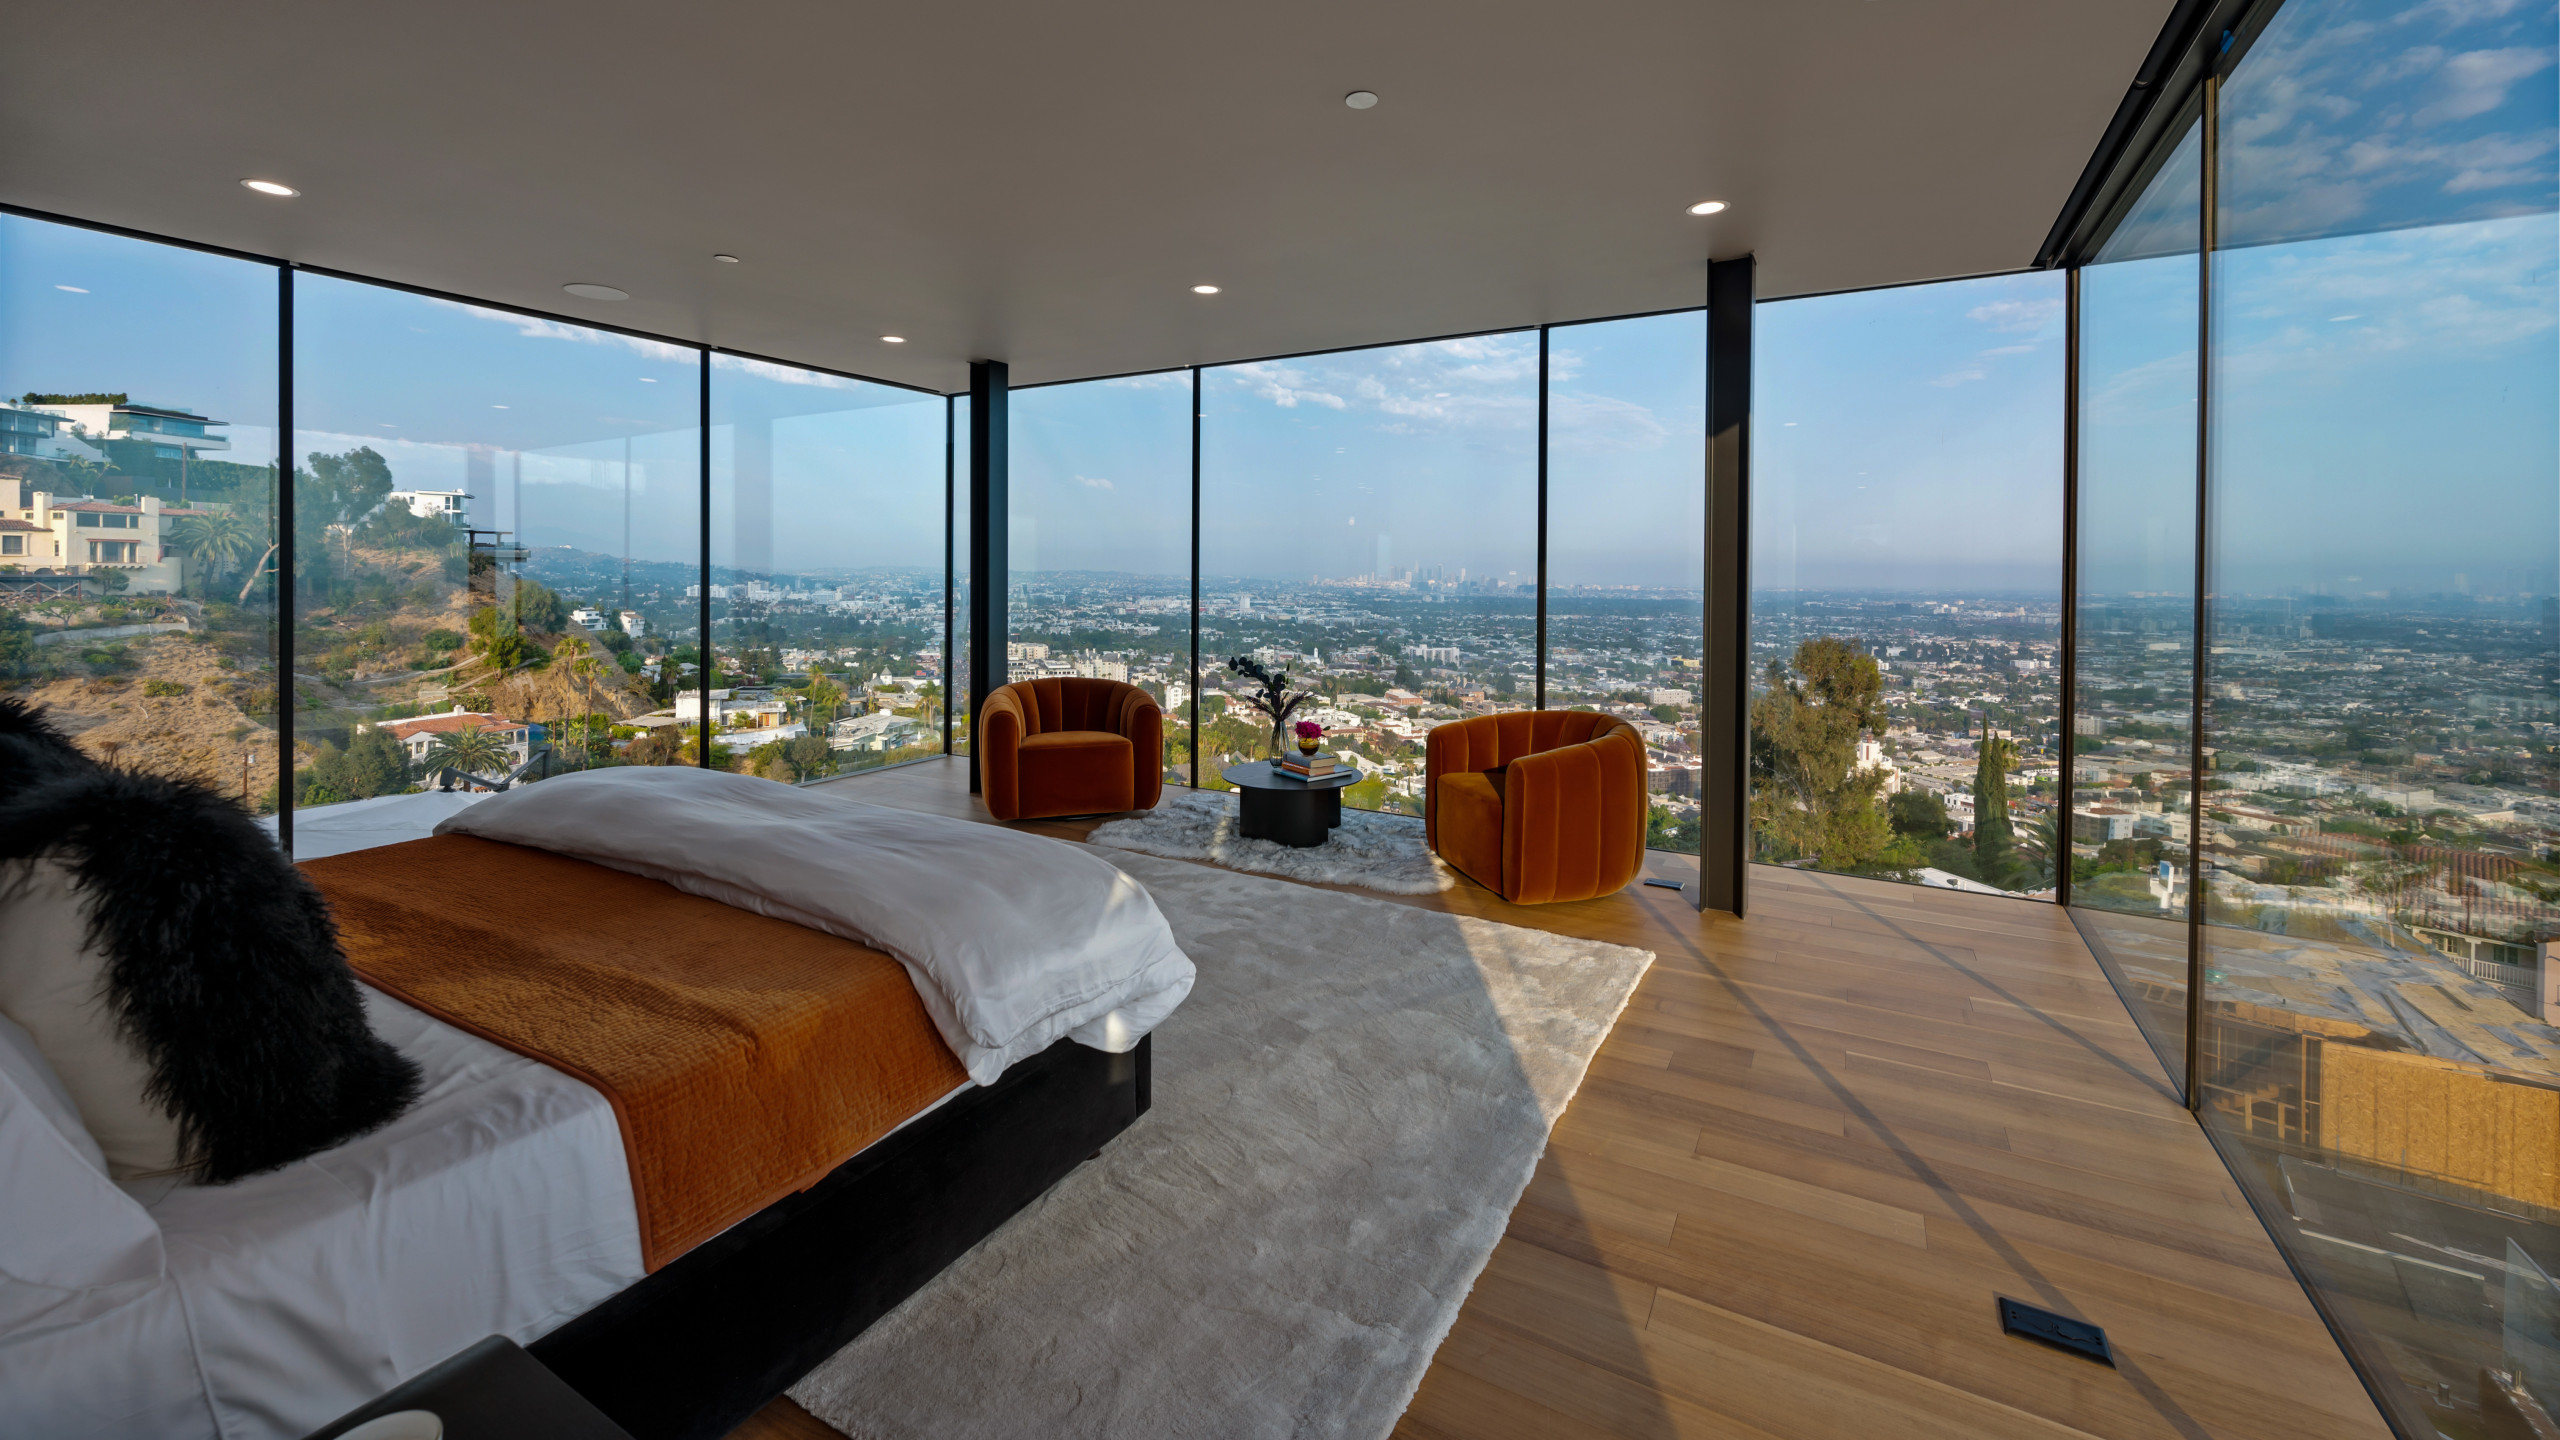 HOUSE ON HOLLYWOOD HILLS